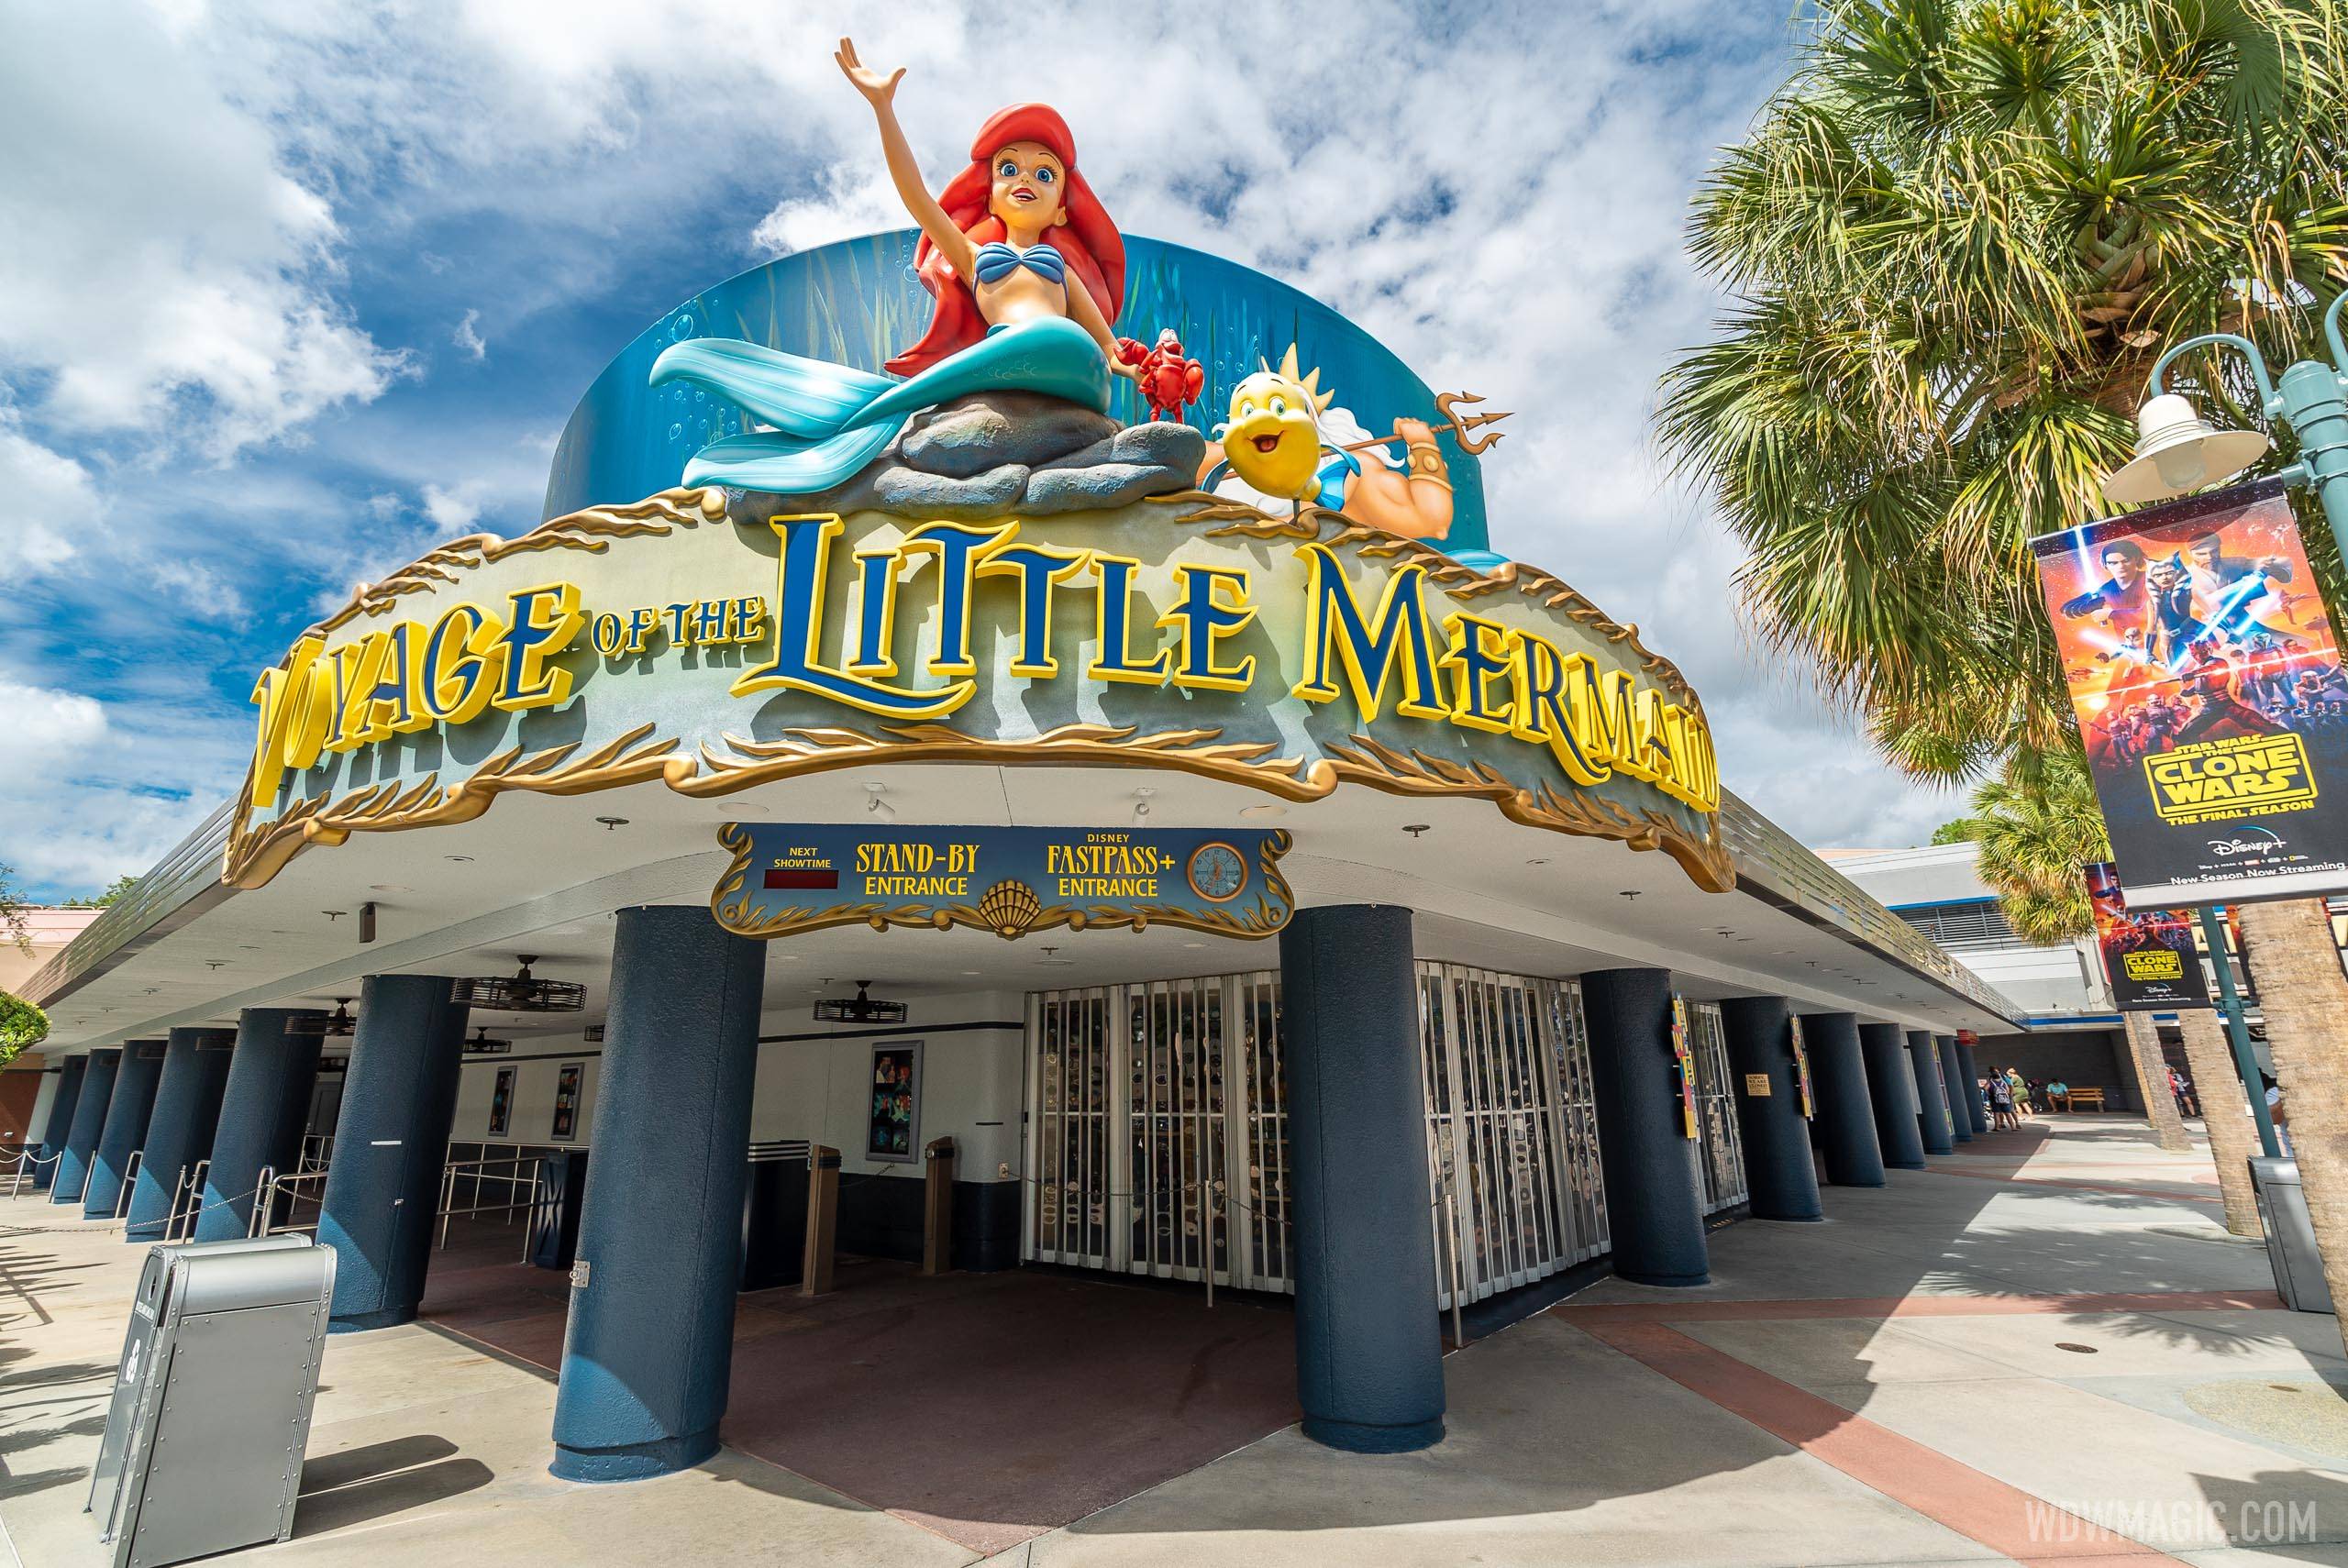 Voyage of the Little Mermaid and nearby shops closing for refurbishment next week